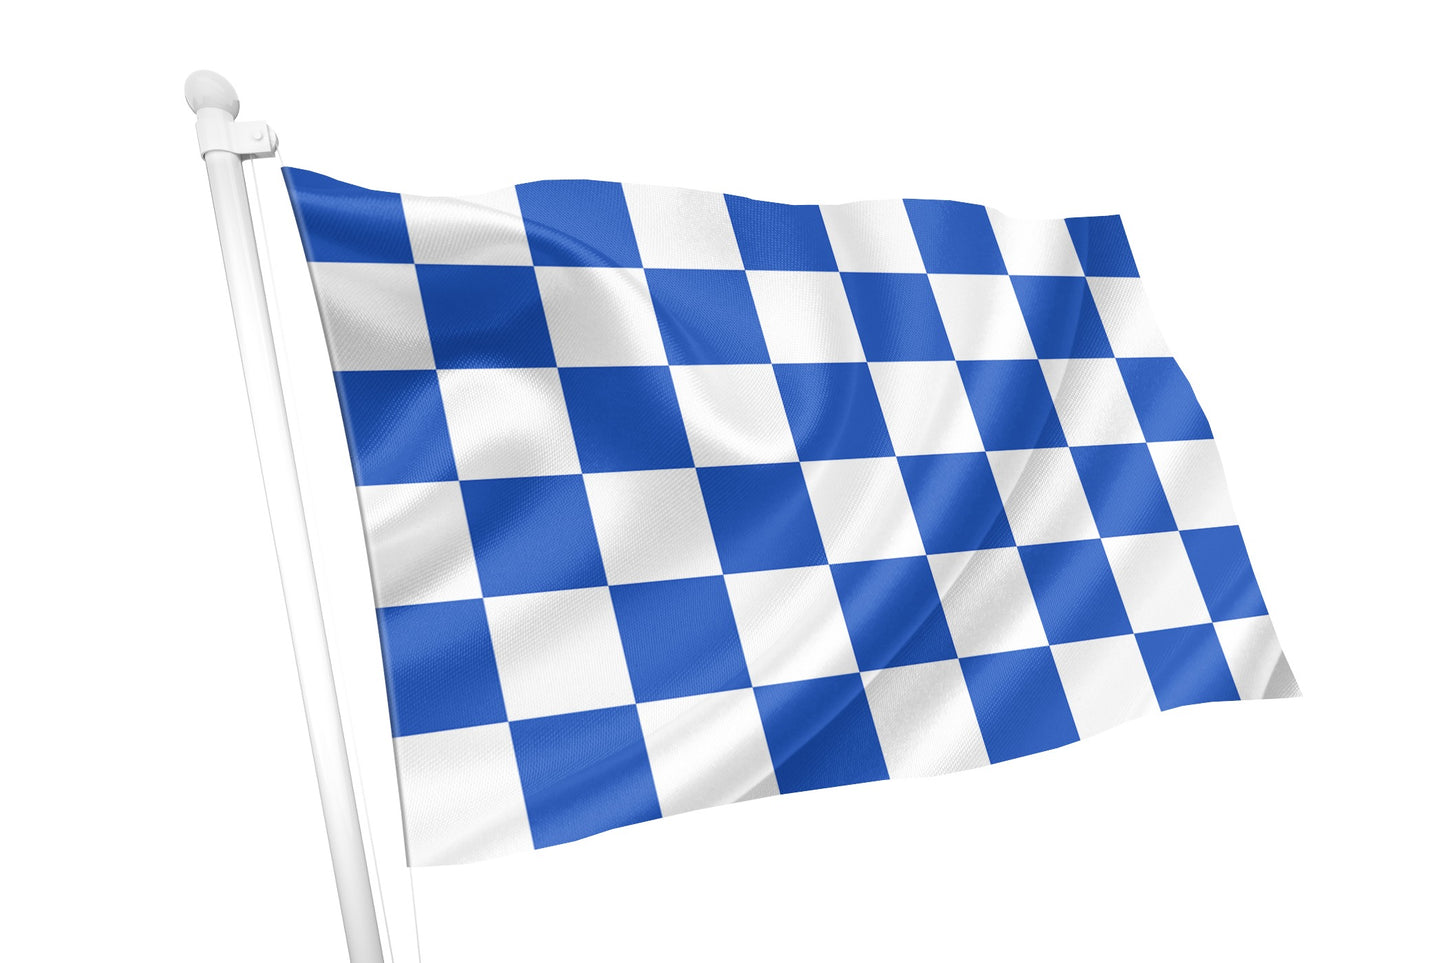 Blue(Patricks - County) and White Chequered Flag